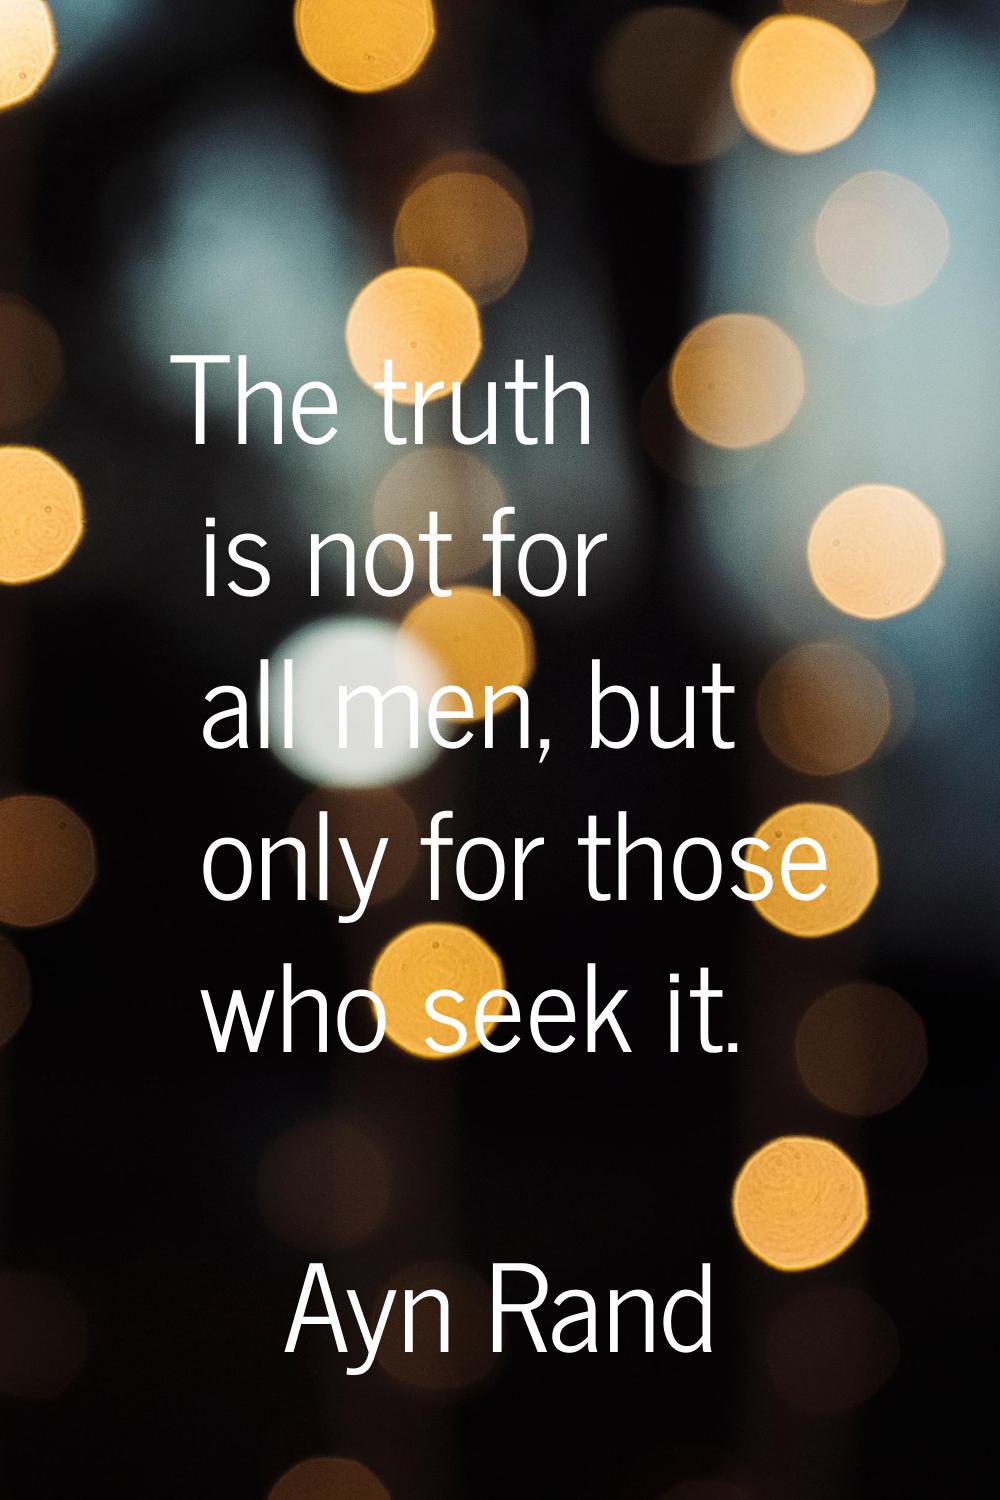 The truth is not for all men, but only for those who seek it.